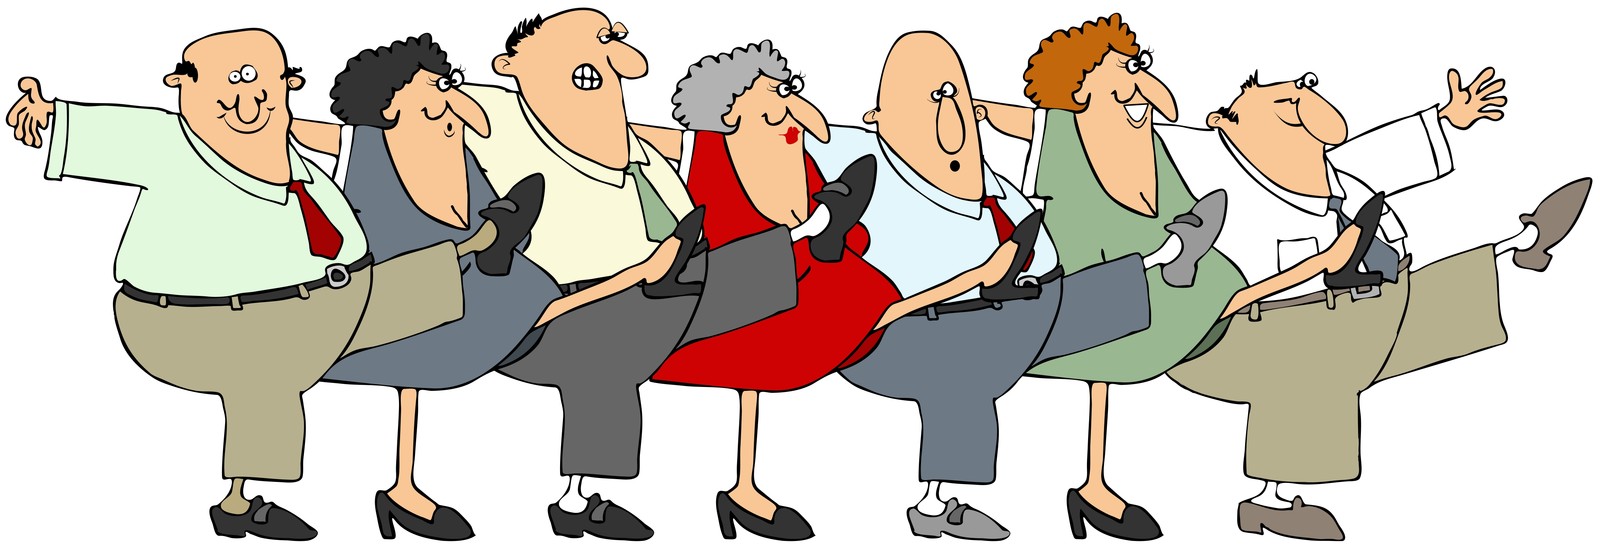 aging clipart - photo #13